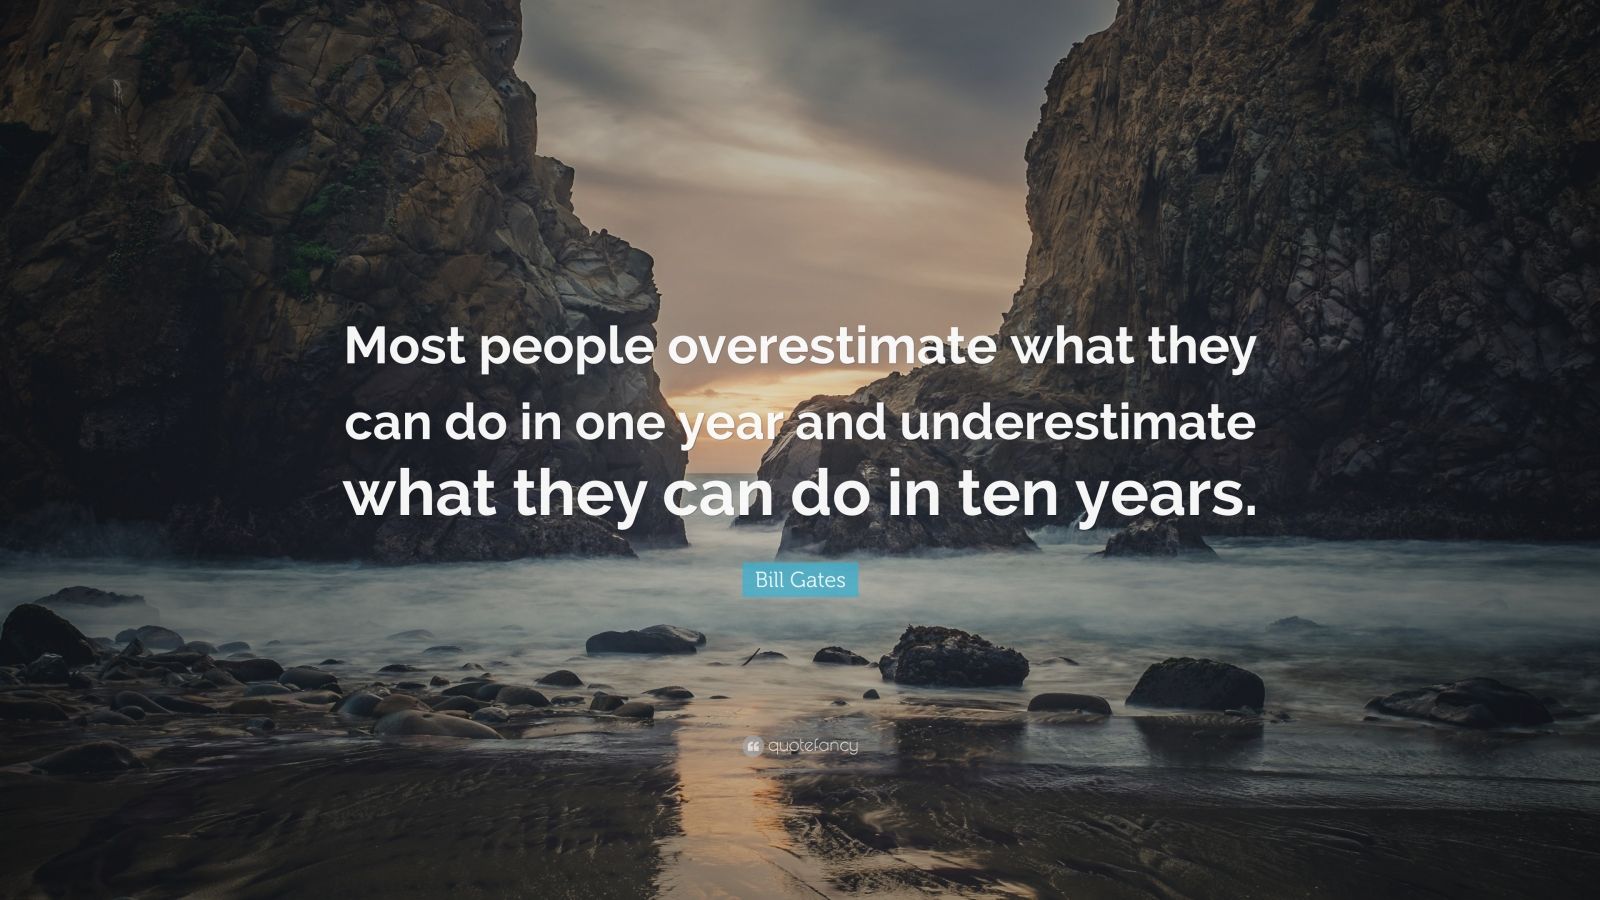 Bill Gates Quote: “Most people overestimate what they can do in one